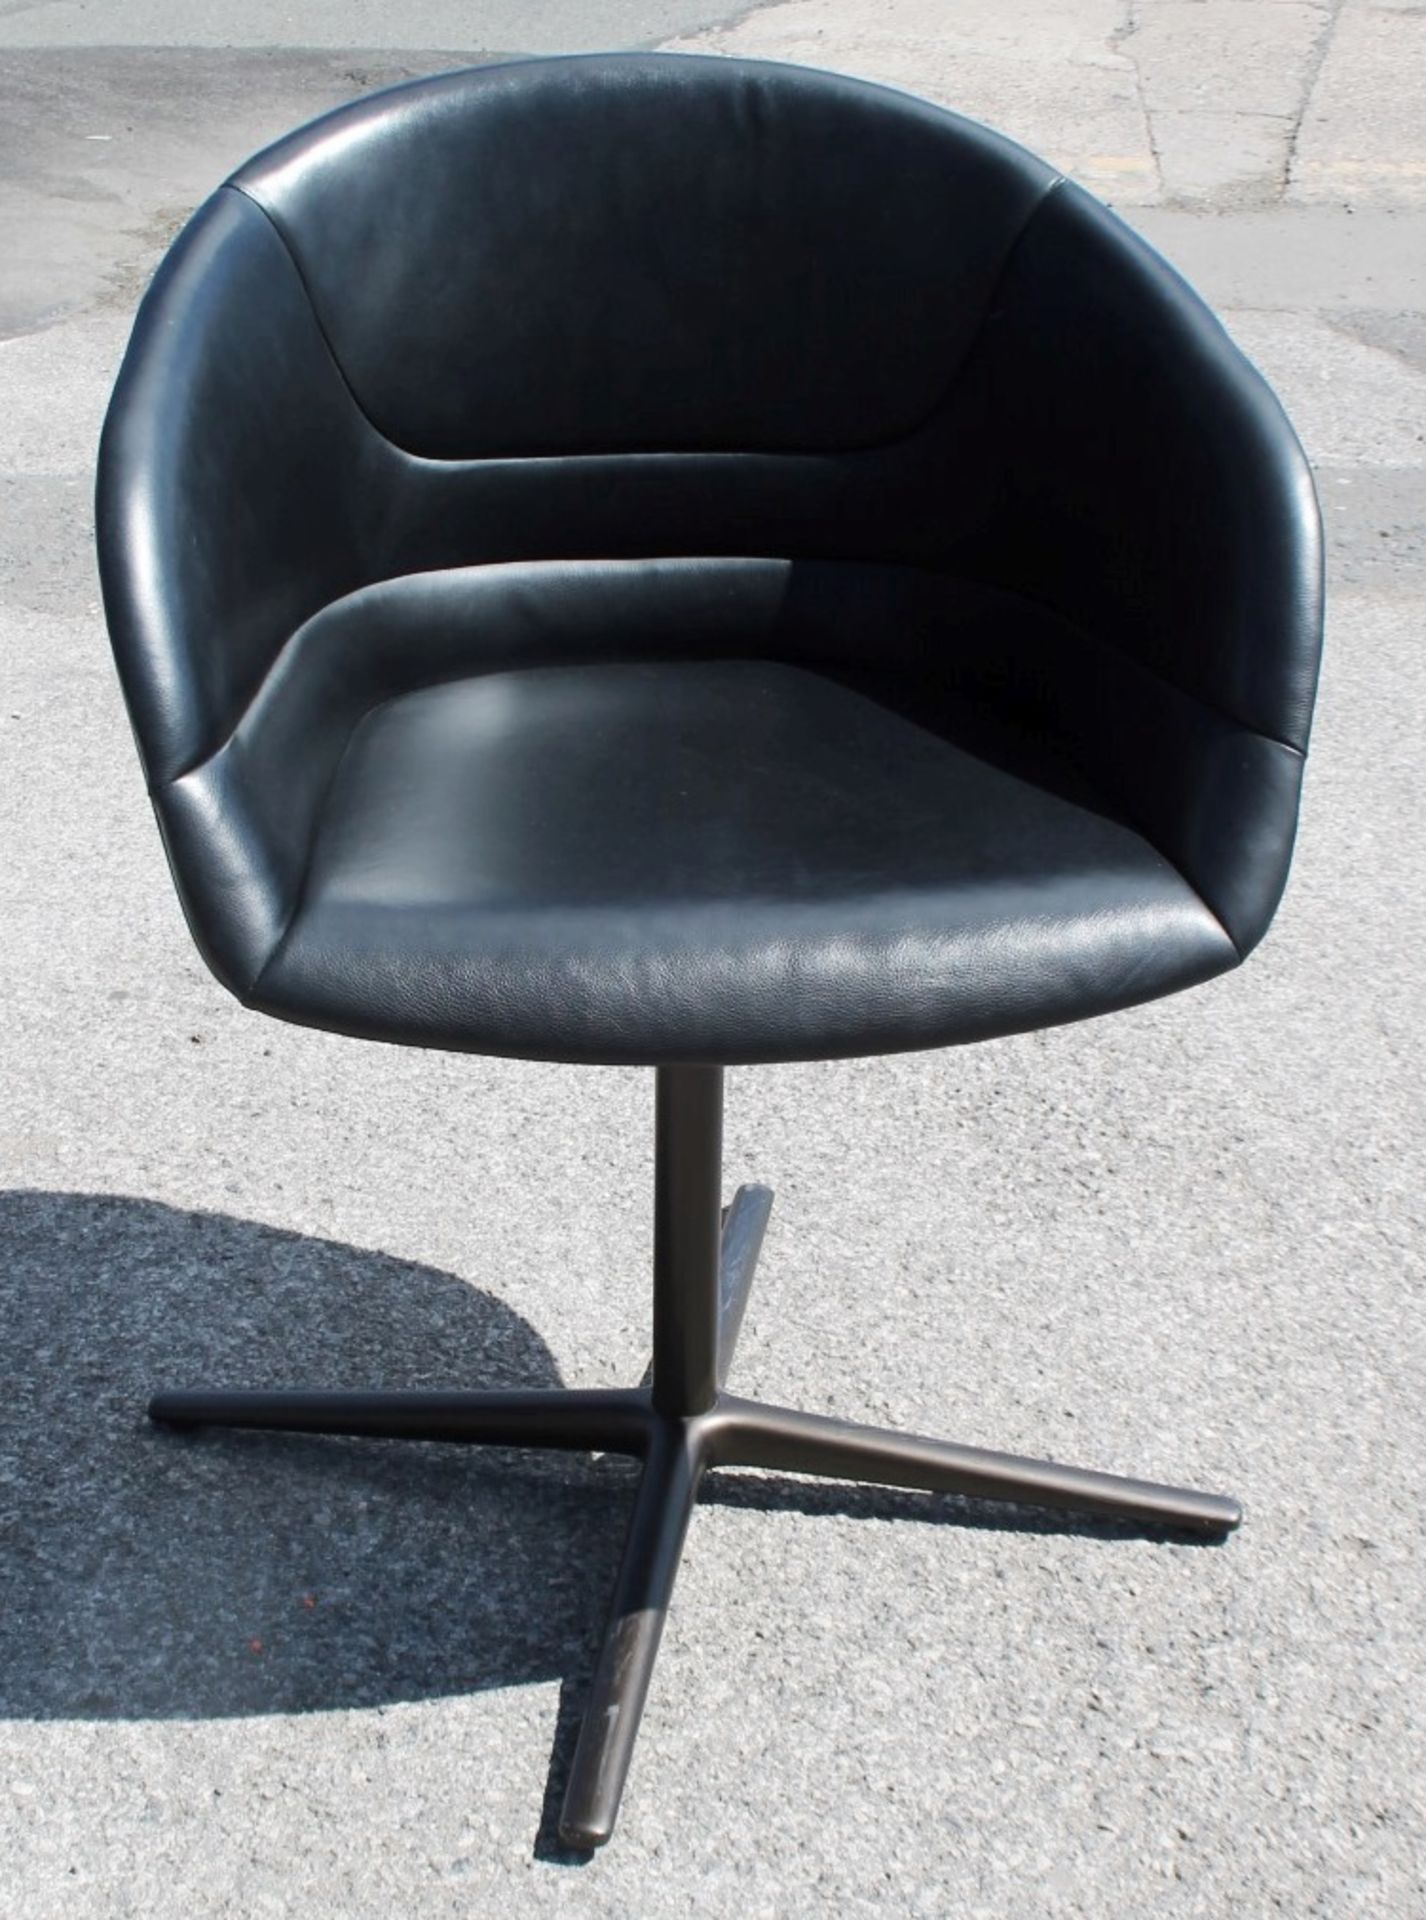 1 x WALTER KNOLL 'Kyo' Genuine Leather Upholstered Chair - Original RRP £1,979 - CL753 - Ref: